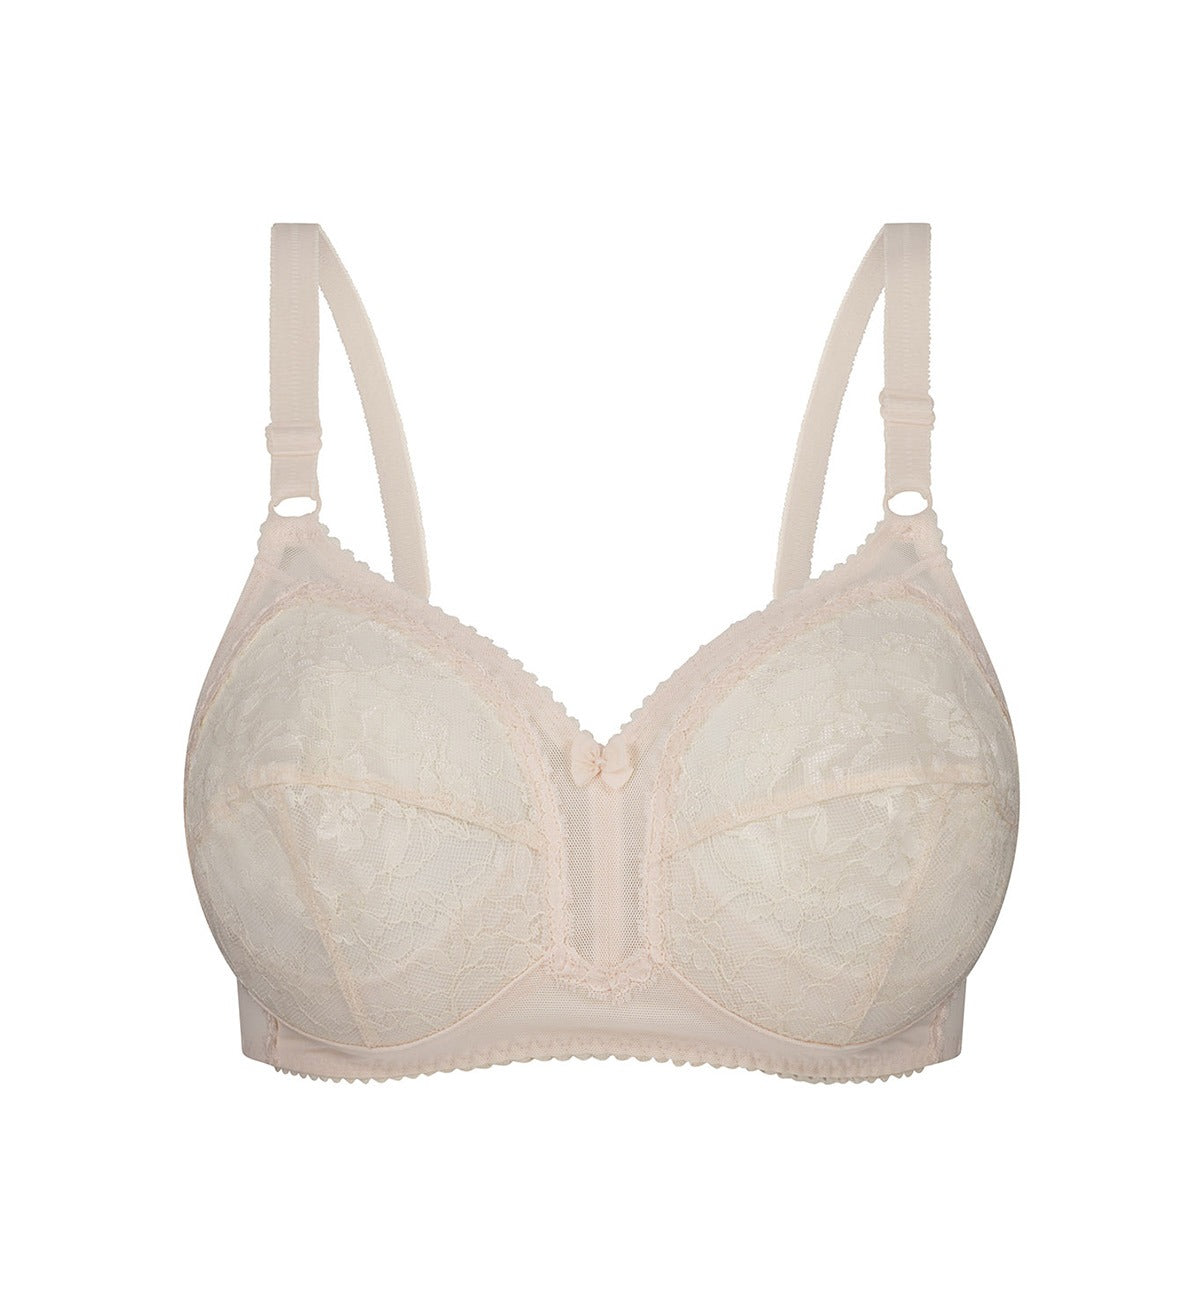 Finelines Invisible Lace Wire-free Crop Top - Shell - Curvy Bras